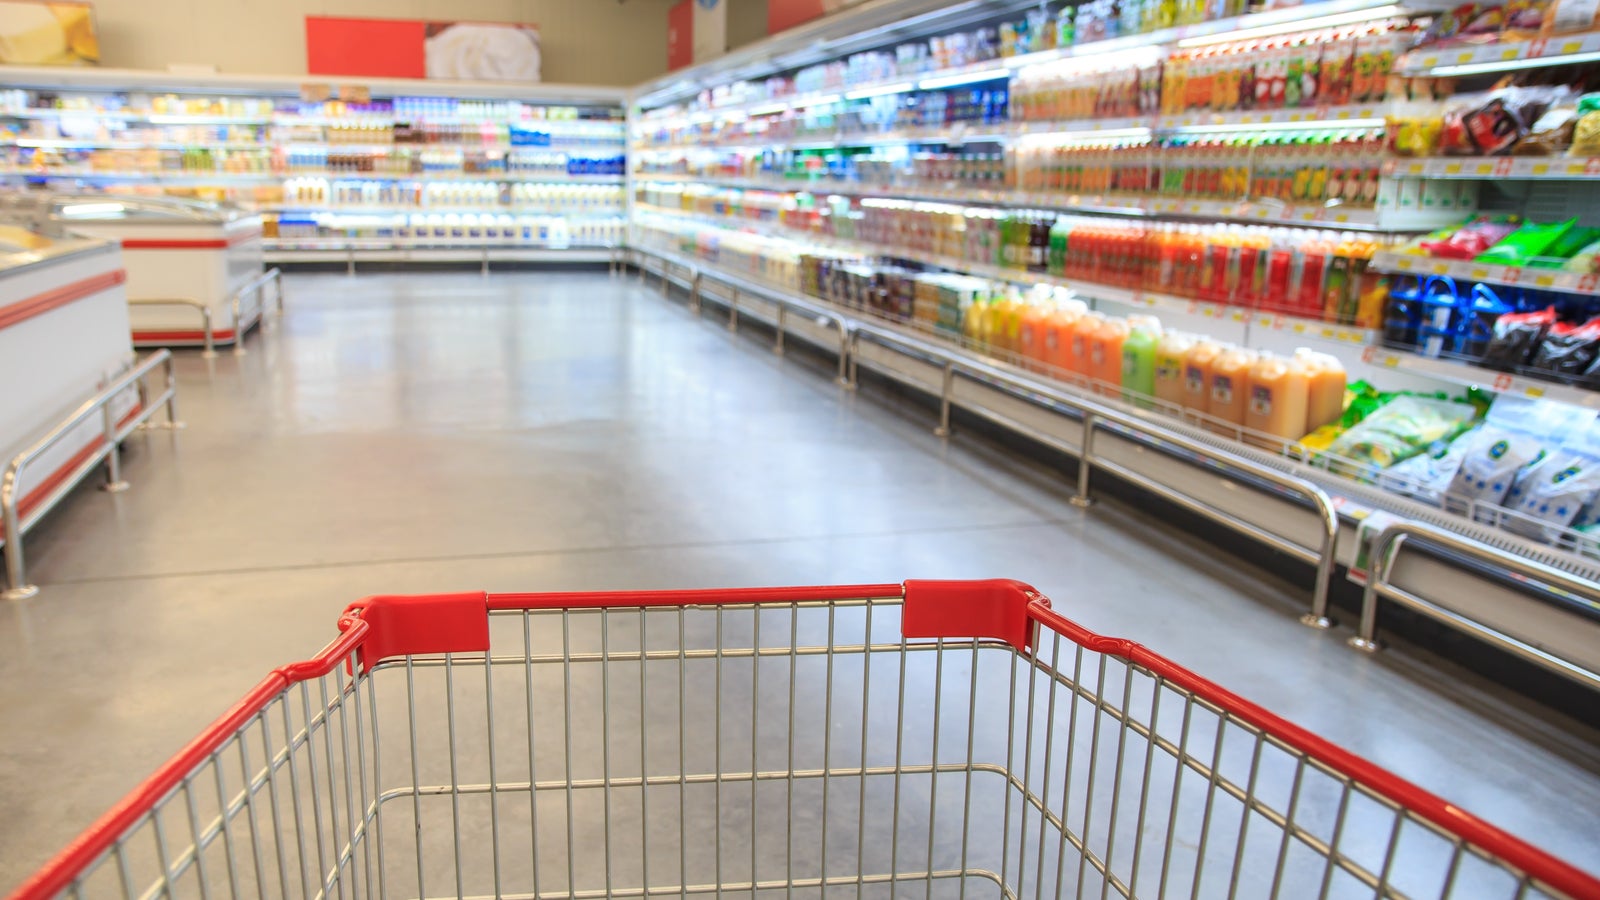 Advanced analytics and predicting market trends in FMCG